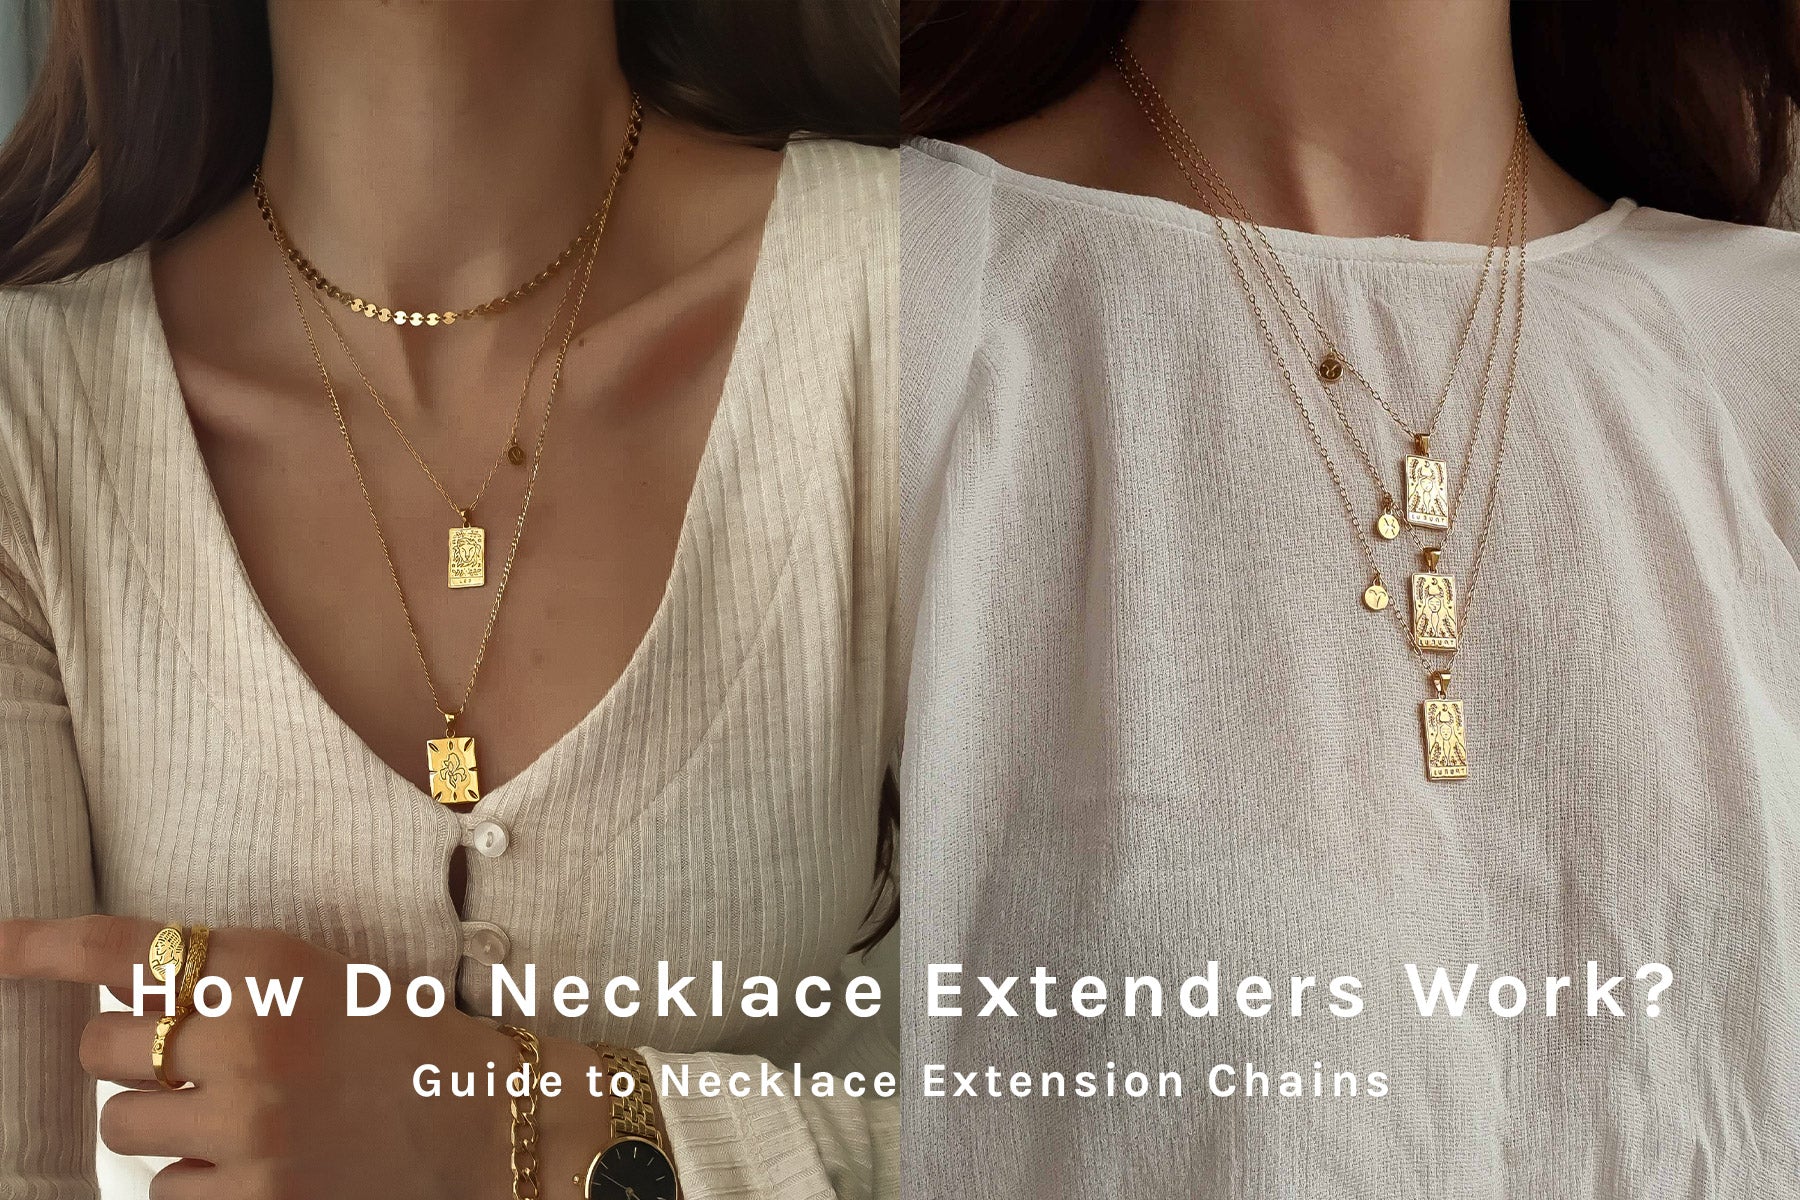 Necklace extenders